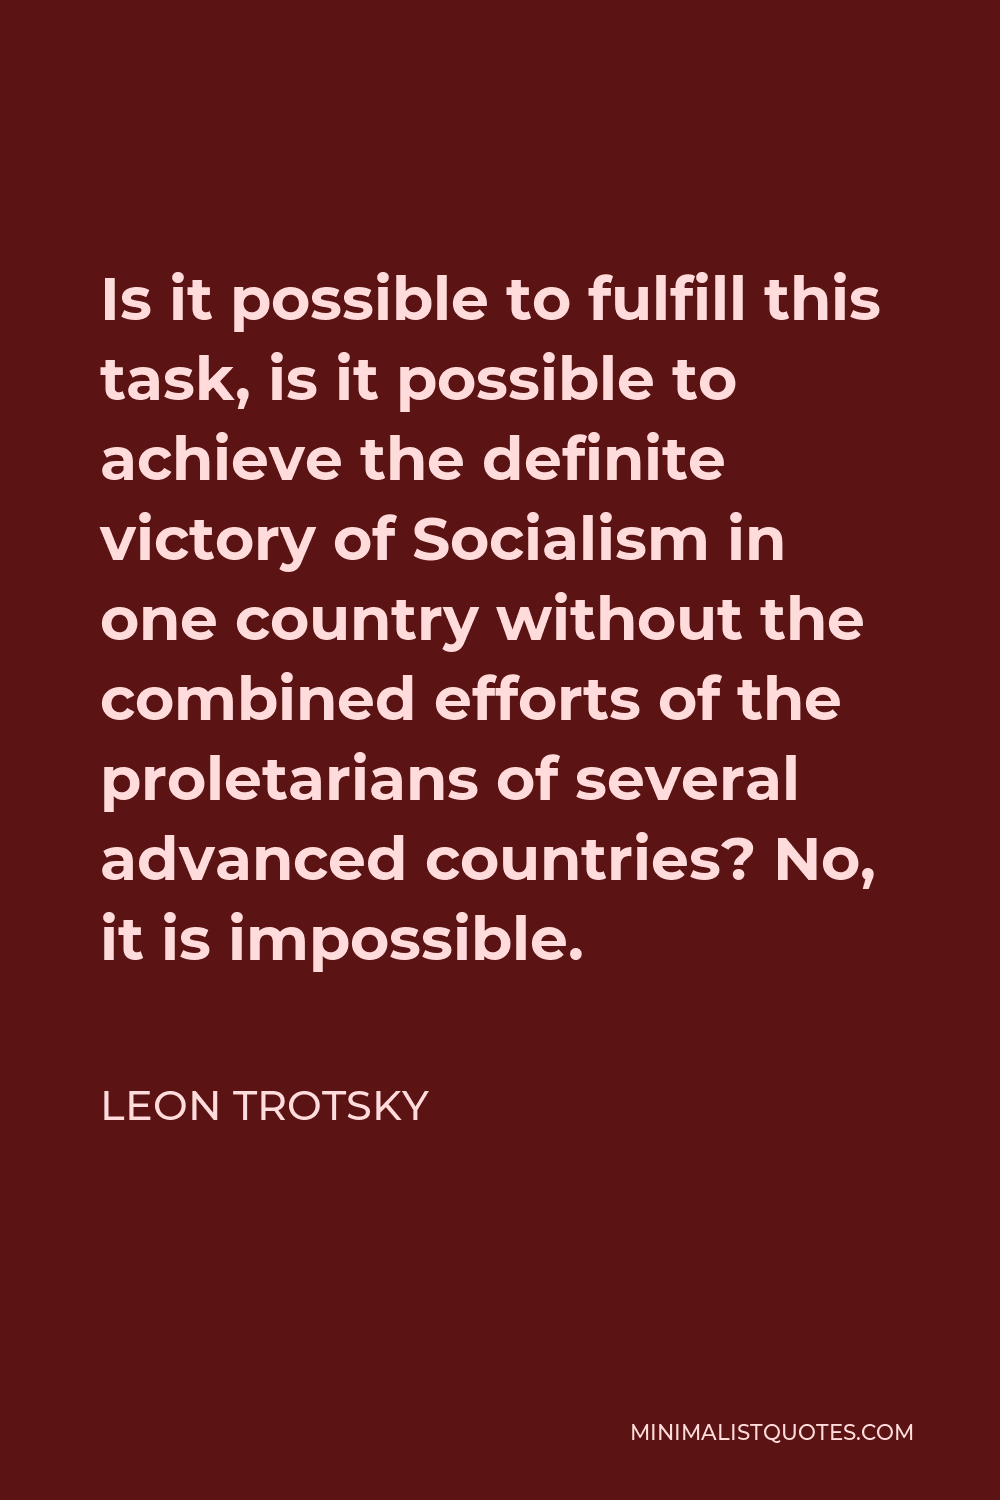 Leon Trotsky Quote - Is it possible to fulfill this task, is it possible to achieve the definite victory of Socialism in one country without the combined efforts of the proletarians of several advanced countries? No, it is impossible.